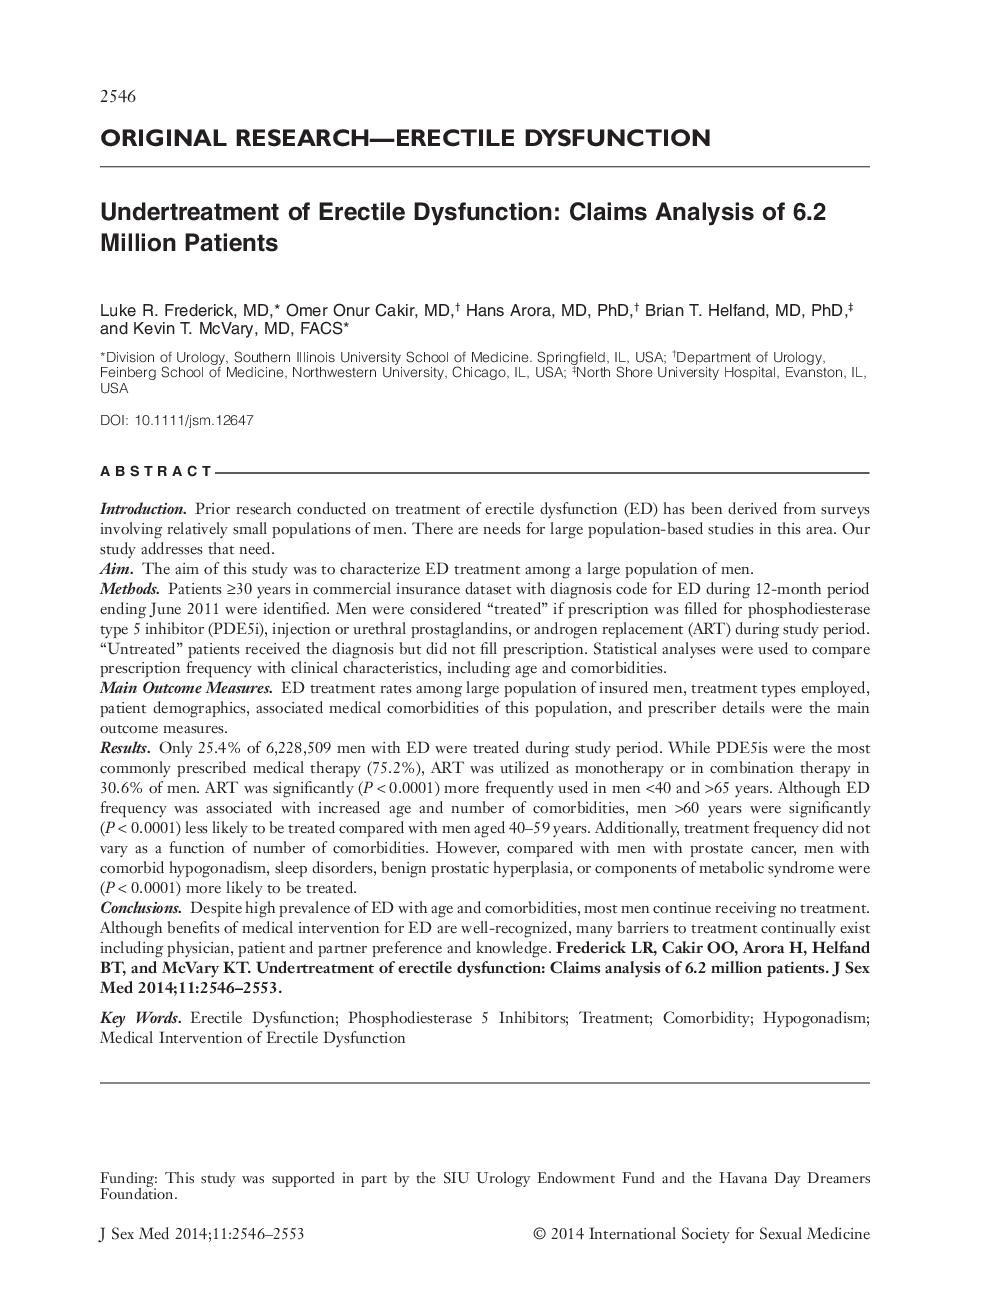 Undertreatment of Erectile Dysfunction: Claims Analysis of 6.2 Million Patients